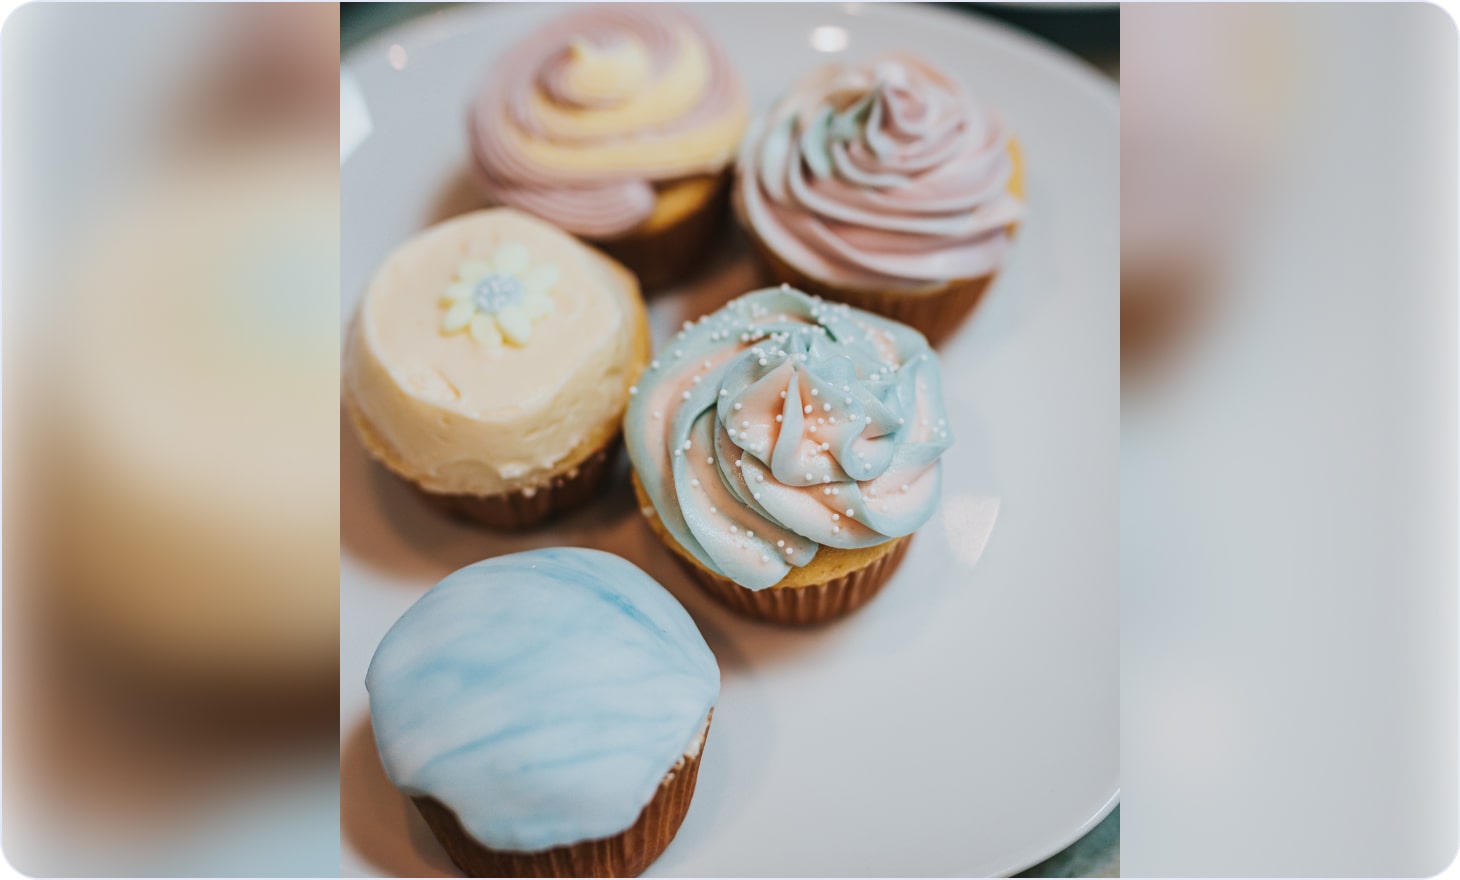 Decorated vanilla cupcakes on a plate